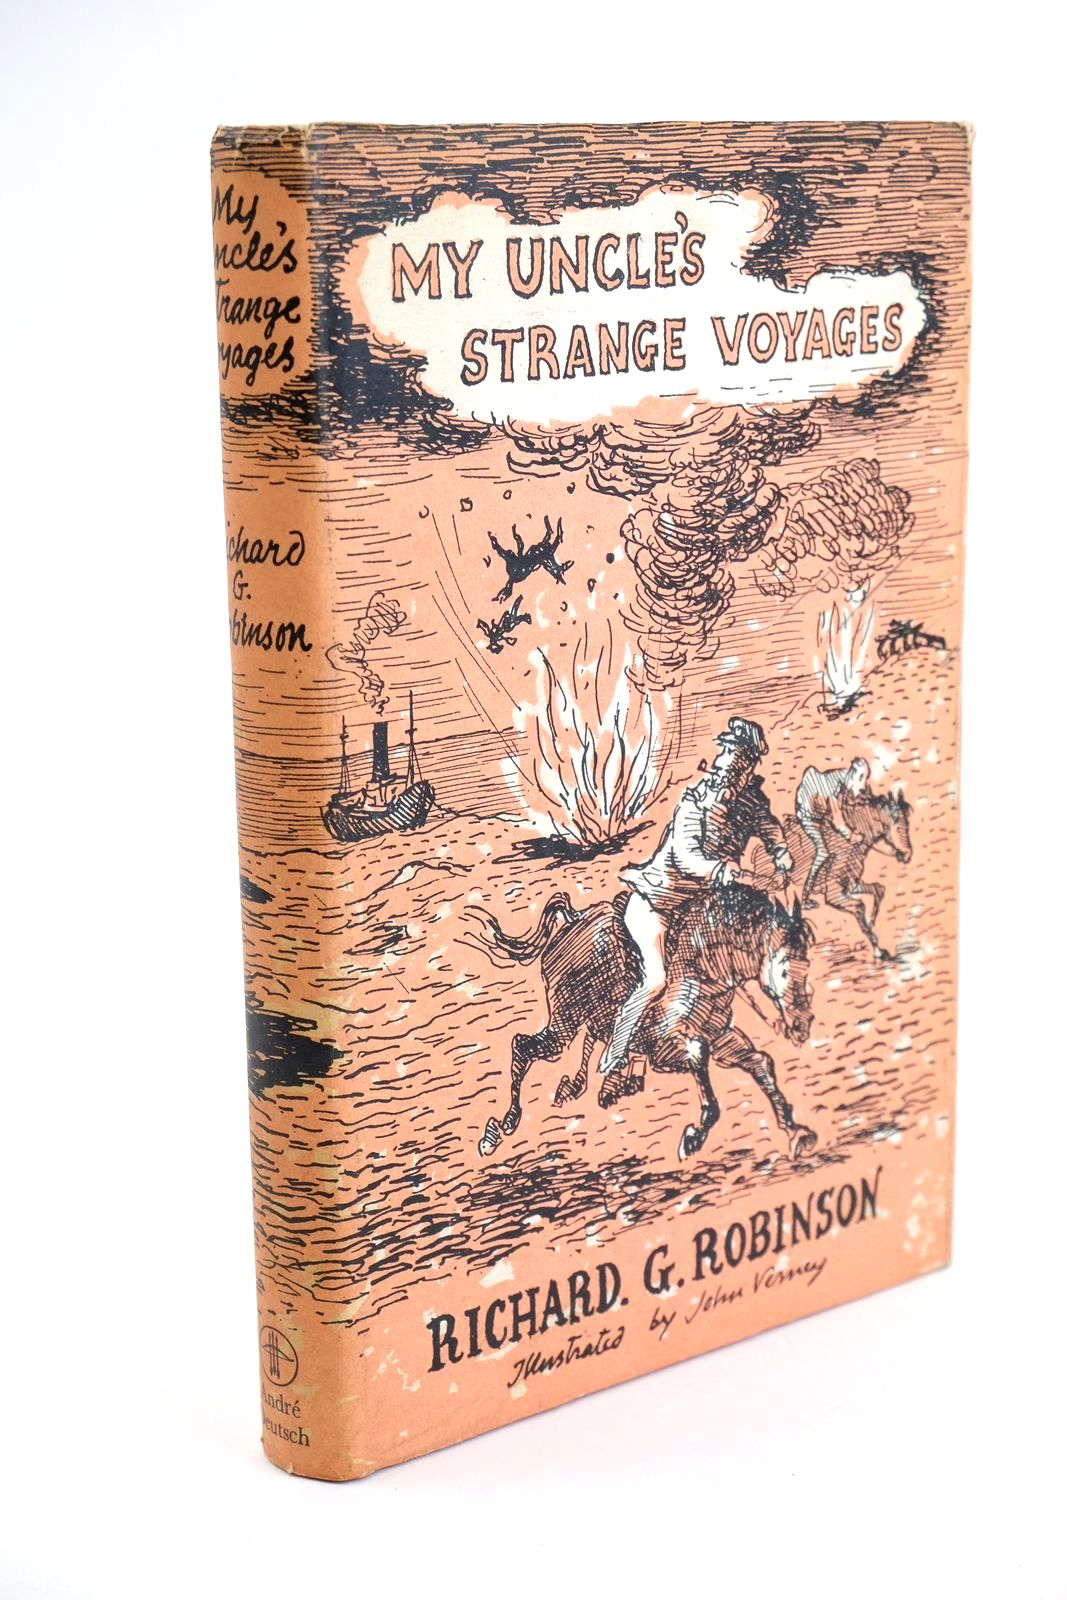 Photo of MY UNCLE'S STRANGE VOYAGES written by Robinson, Richard G. illustrated by Verney, John published by Andre Deutsch Limited (STOCK CODE: 1323689)  for sale by Stella & Rose's Books